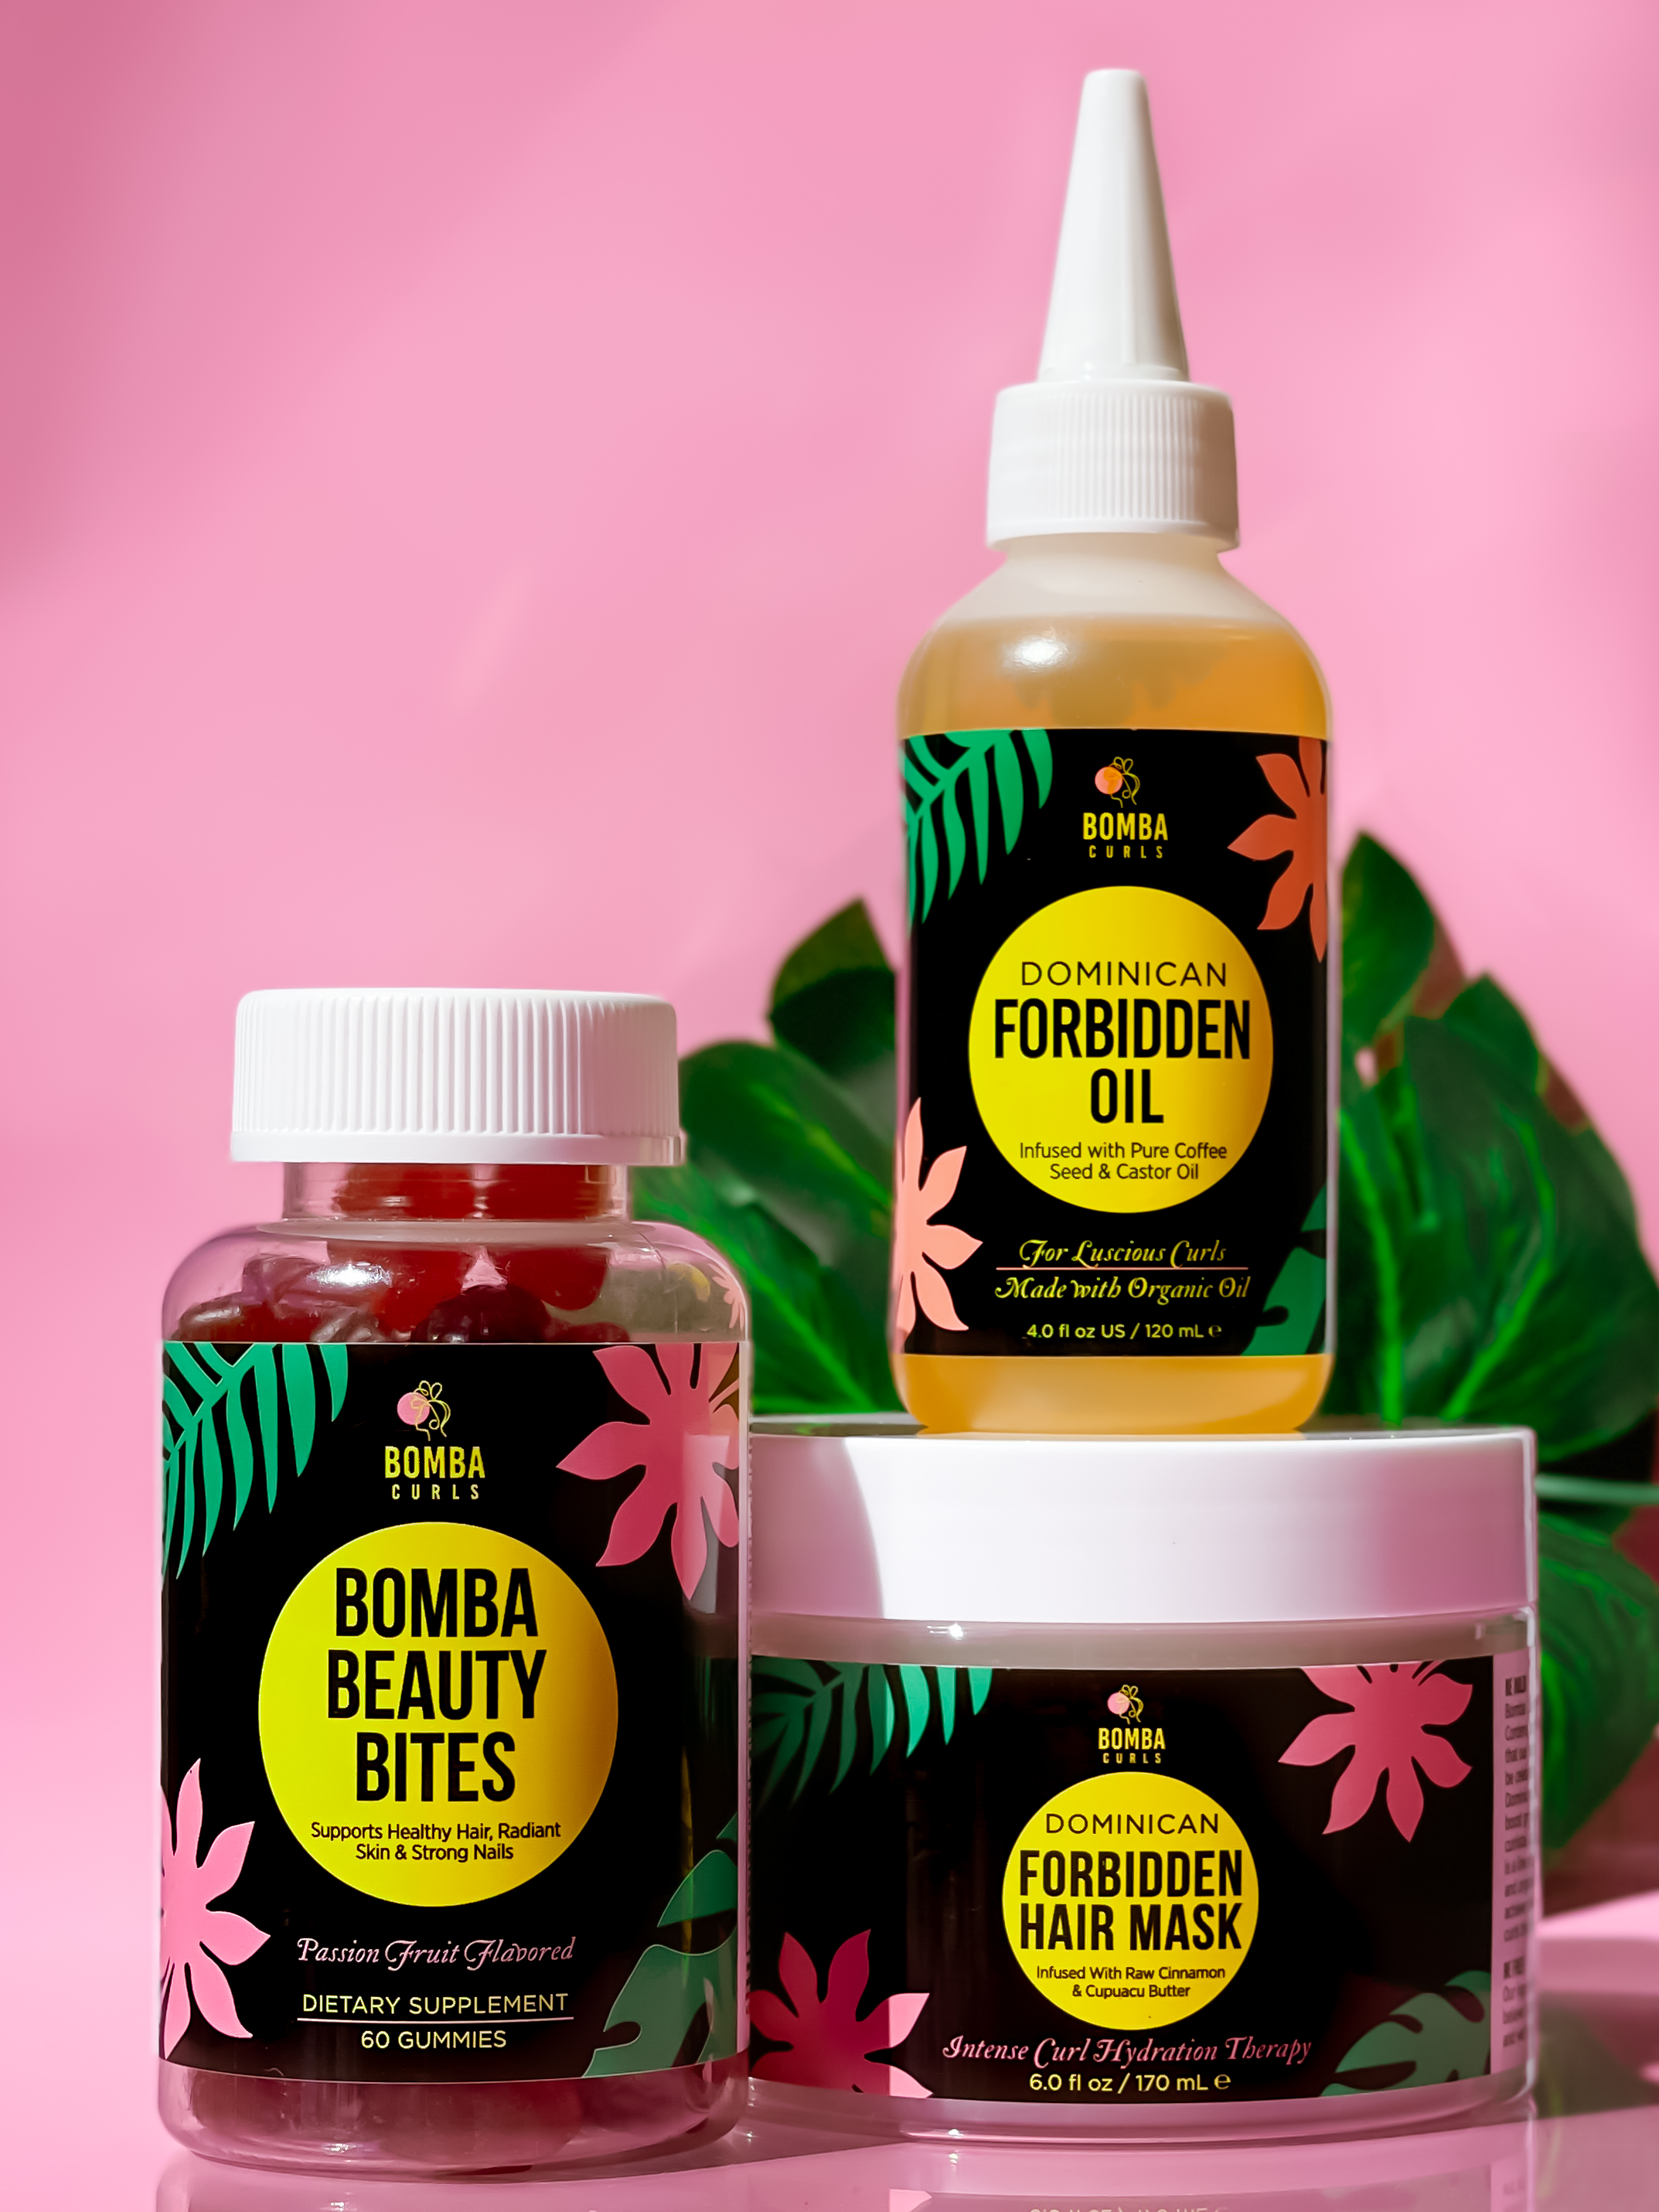 How Alopecia Lead to the Creation of Forbidden Oil by Bomba Curls